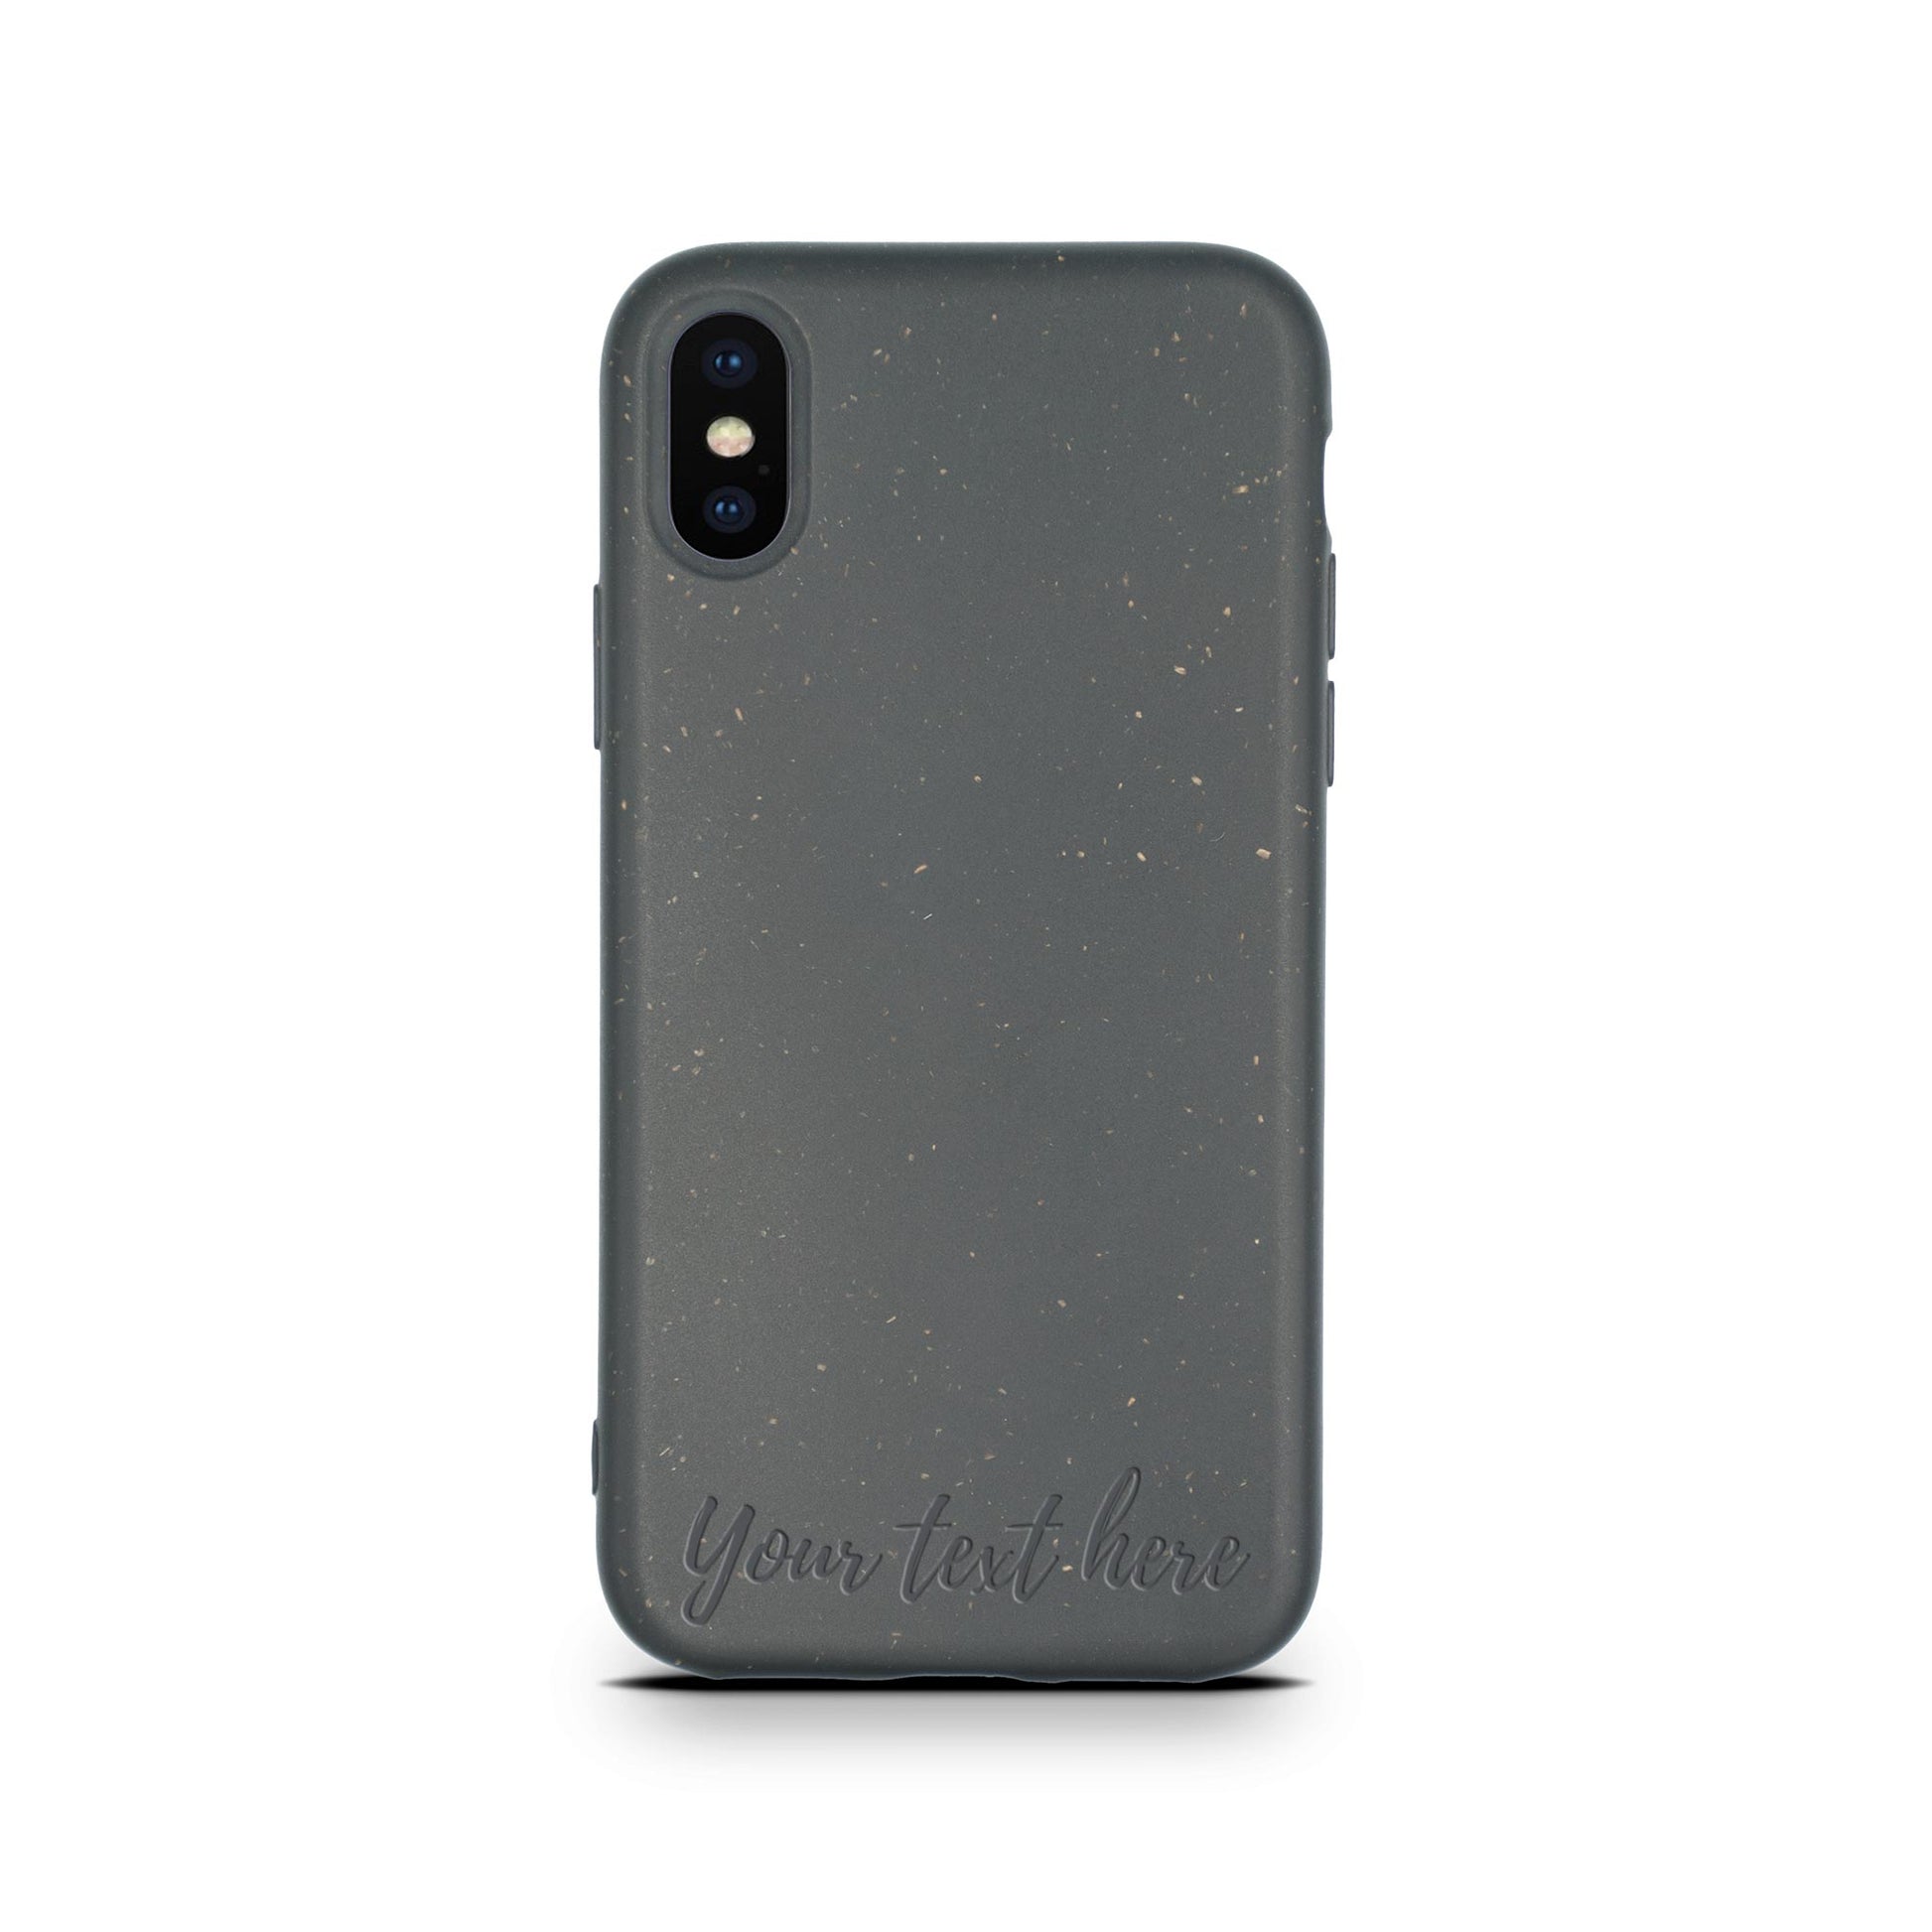 A Tan Lily biodegradable personalized iPhone case with space for personalized text, featuring a speckled gray design, on a white background.